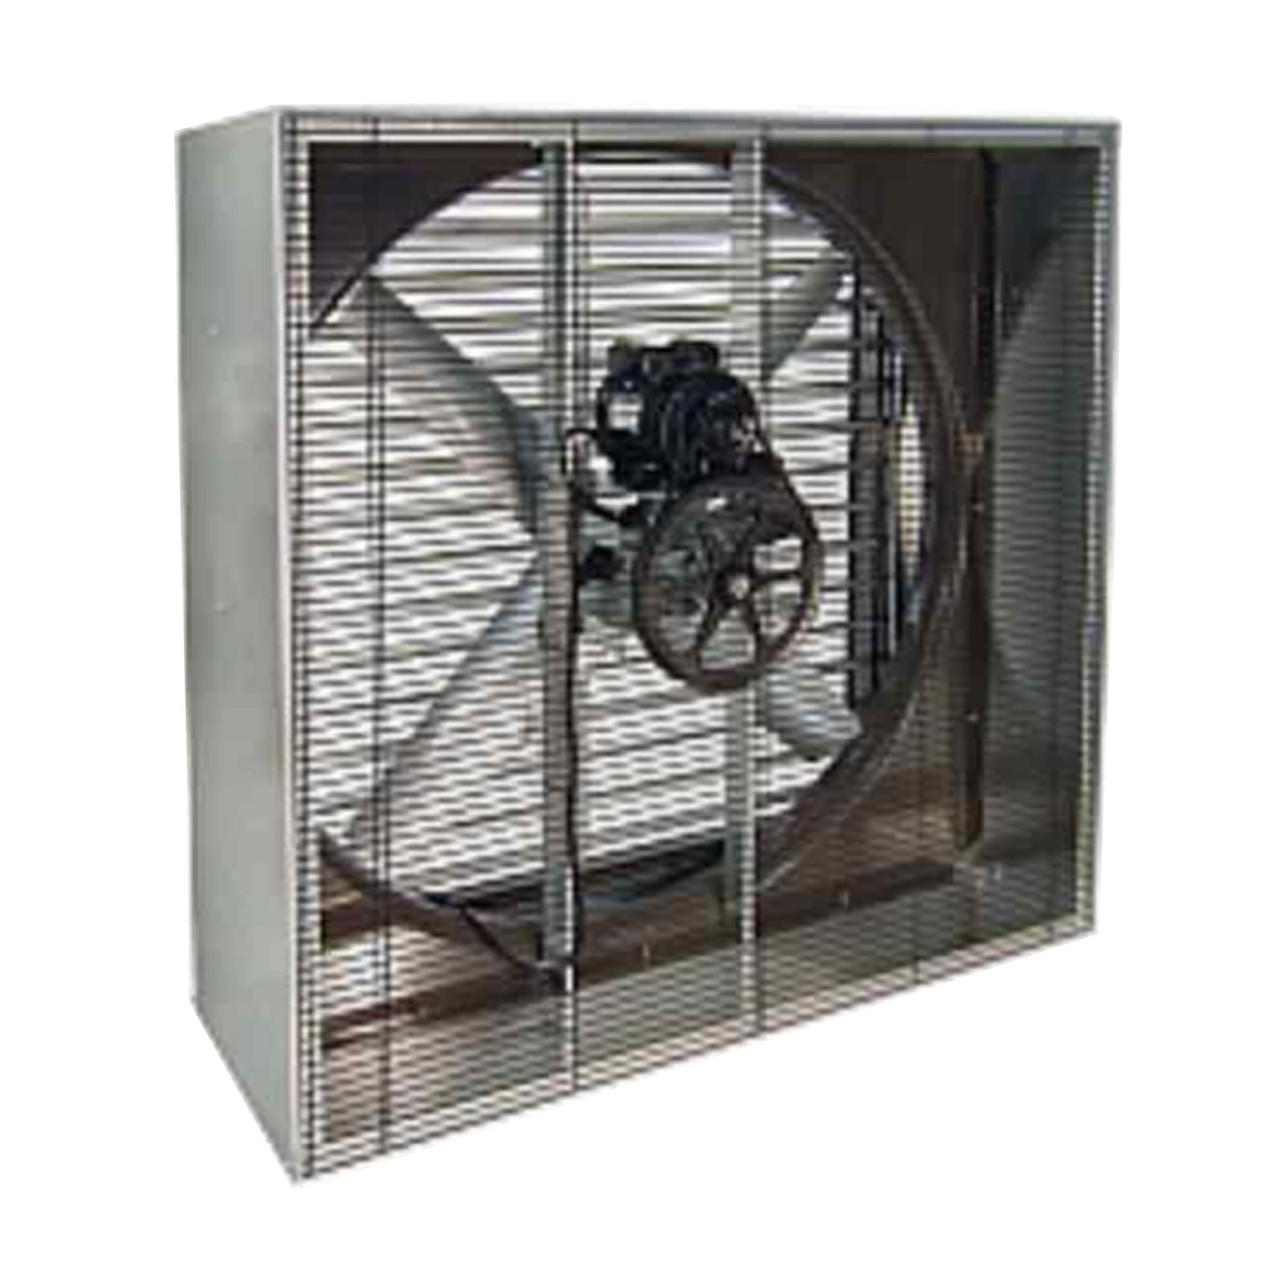 VIK3012-V Triangle Fans 30" 1 Speed 1/3 HP 115V 1-Phase Open Drip Proof Motor Belt Drive Industrial Exhaust Fan with Shutter and Guard